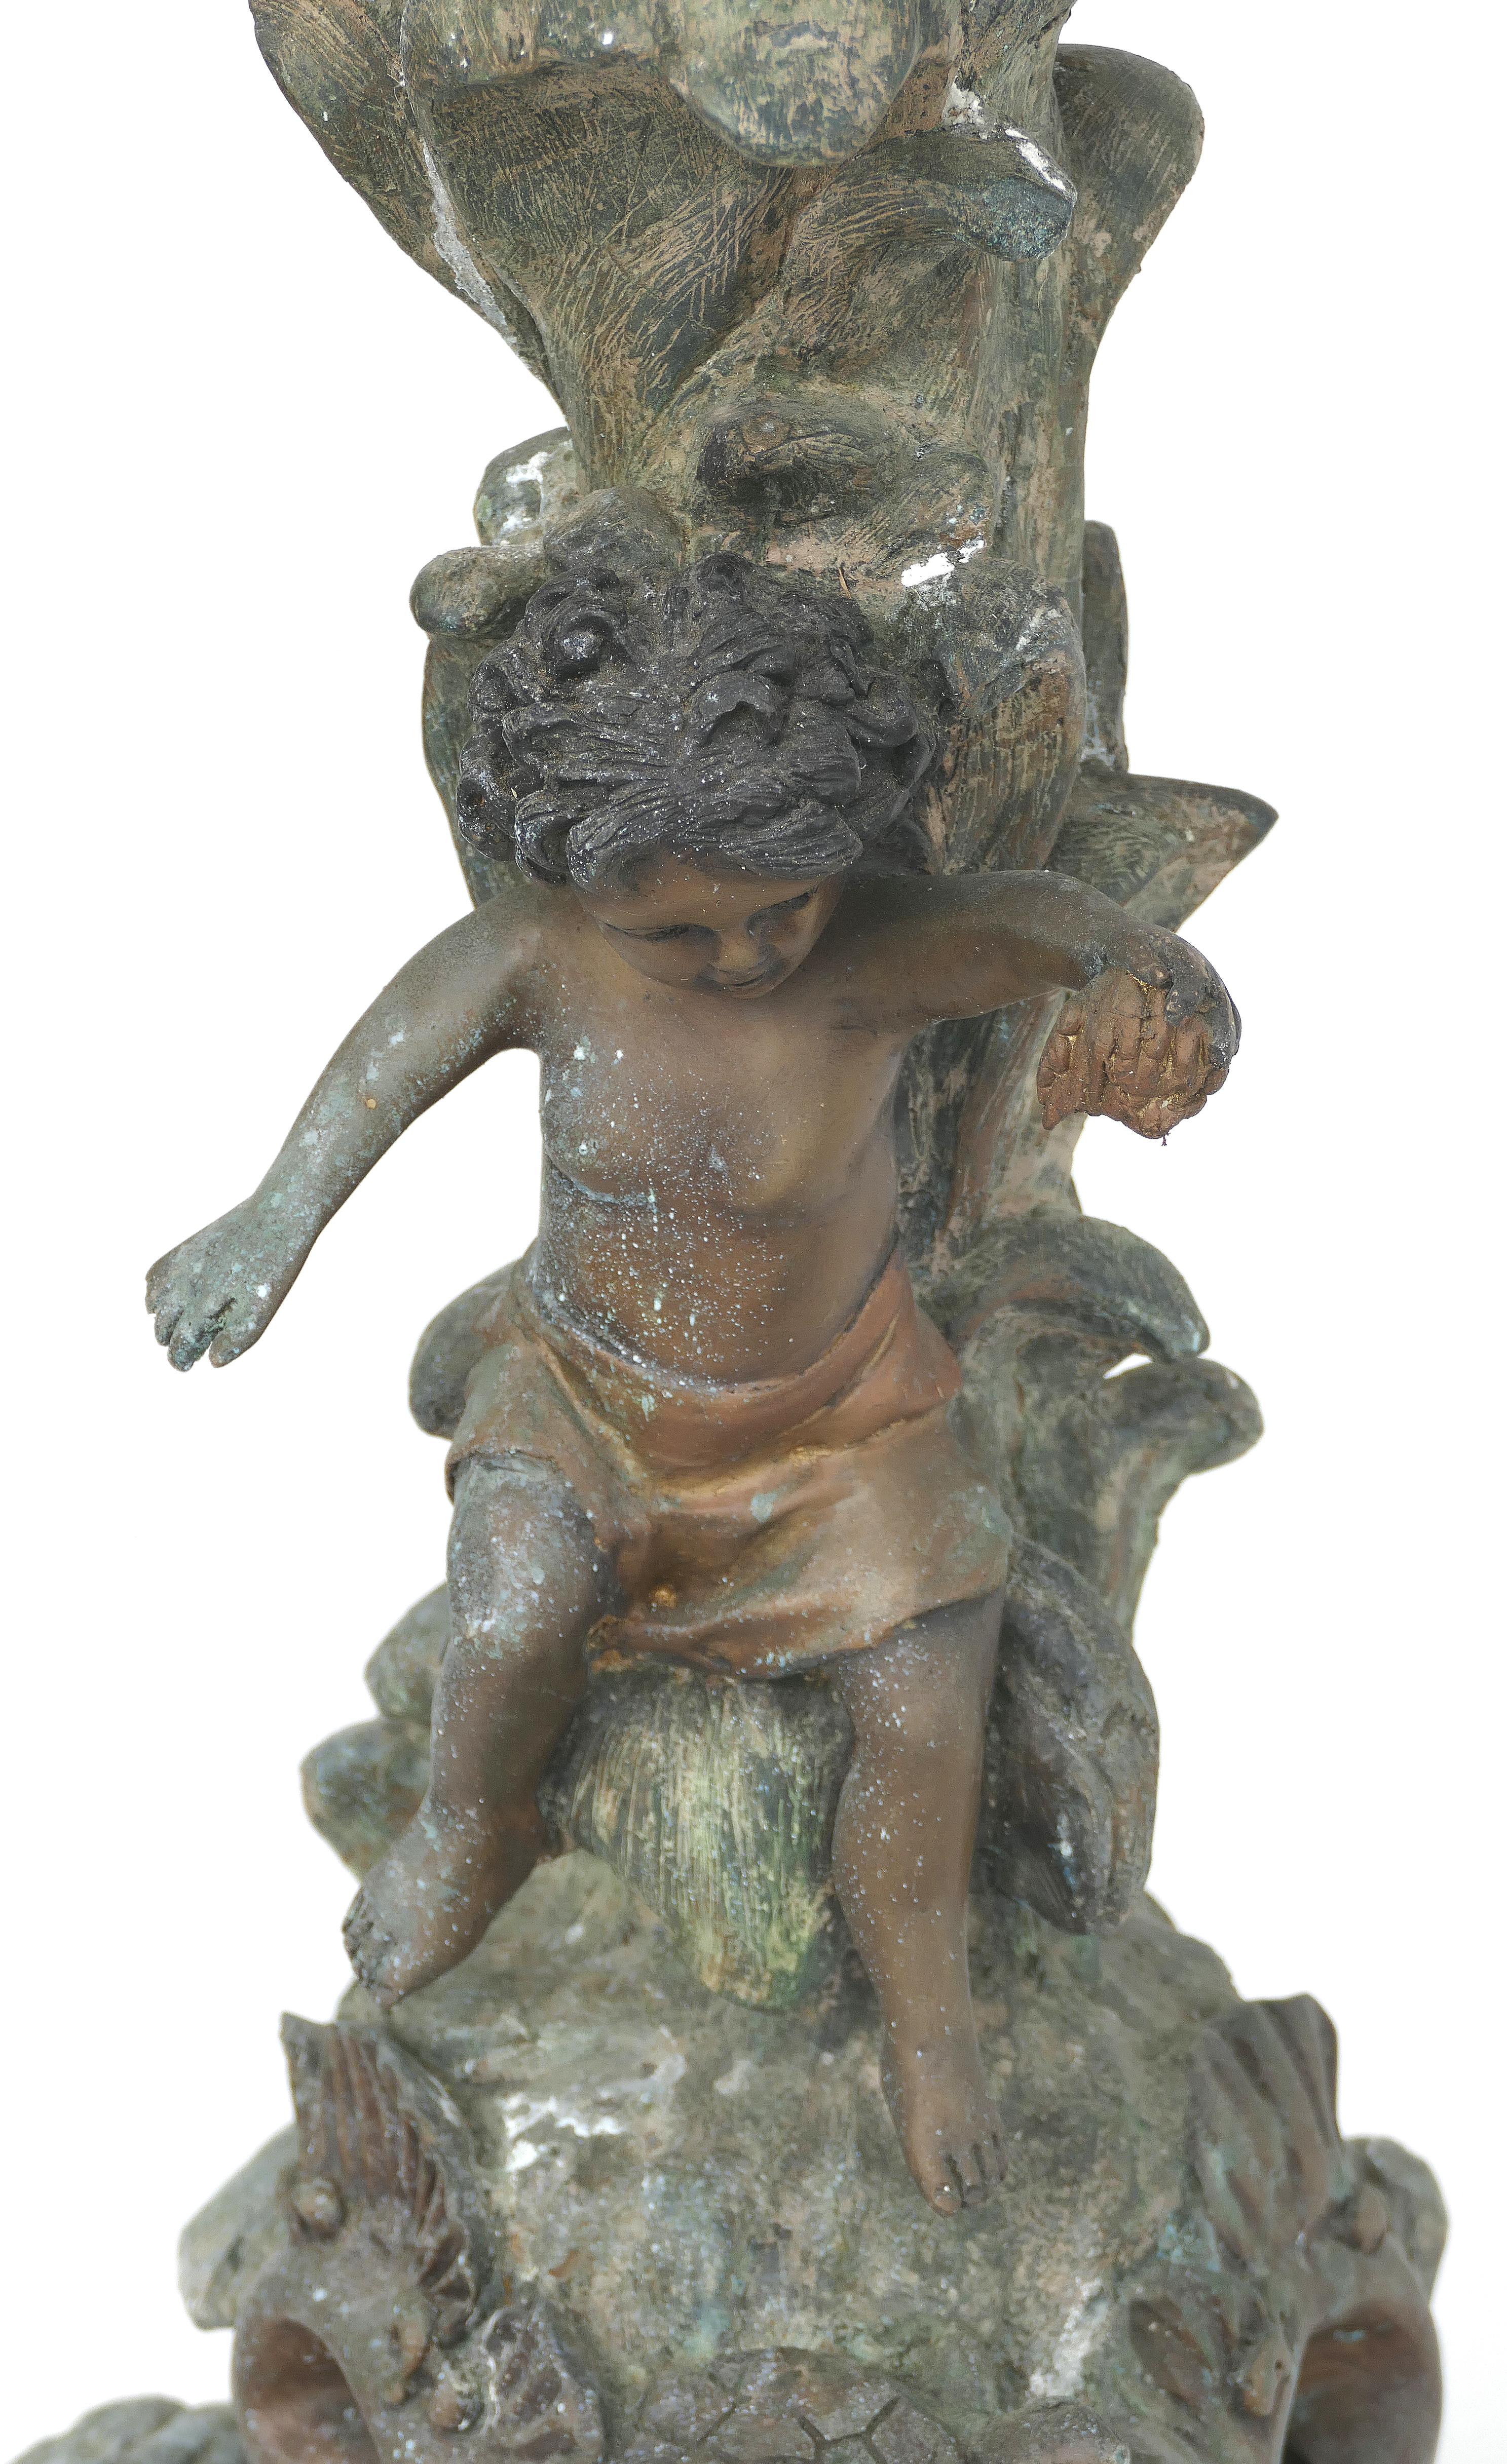 Antique bronze cherub jardinière planter

Offered for sale is a late 19th, early 20th century bronze jardinière planter depicting a cherub. Freestanding and viewed in the round, the planter has a lovely aged patina.